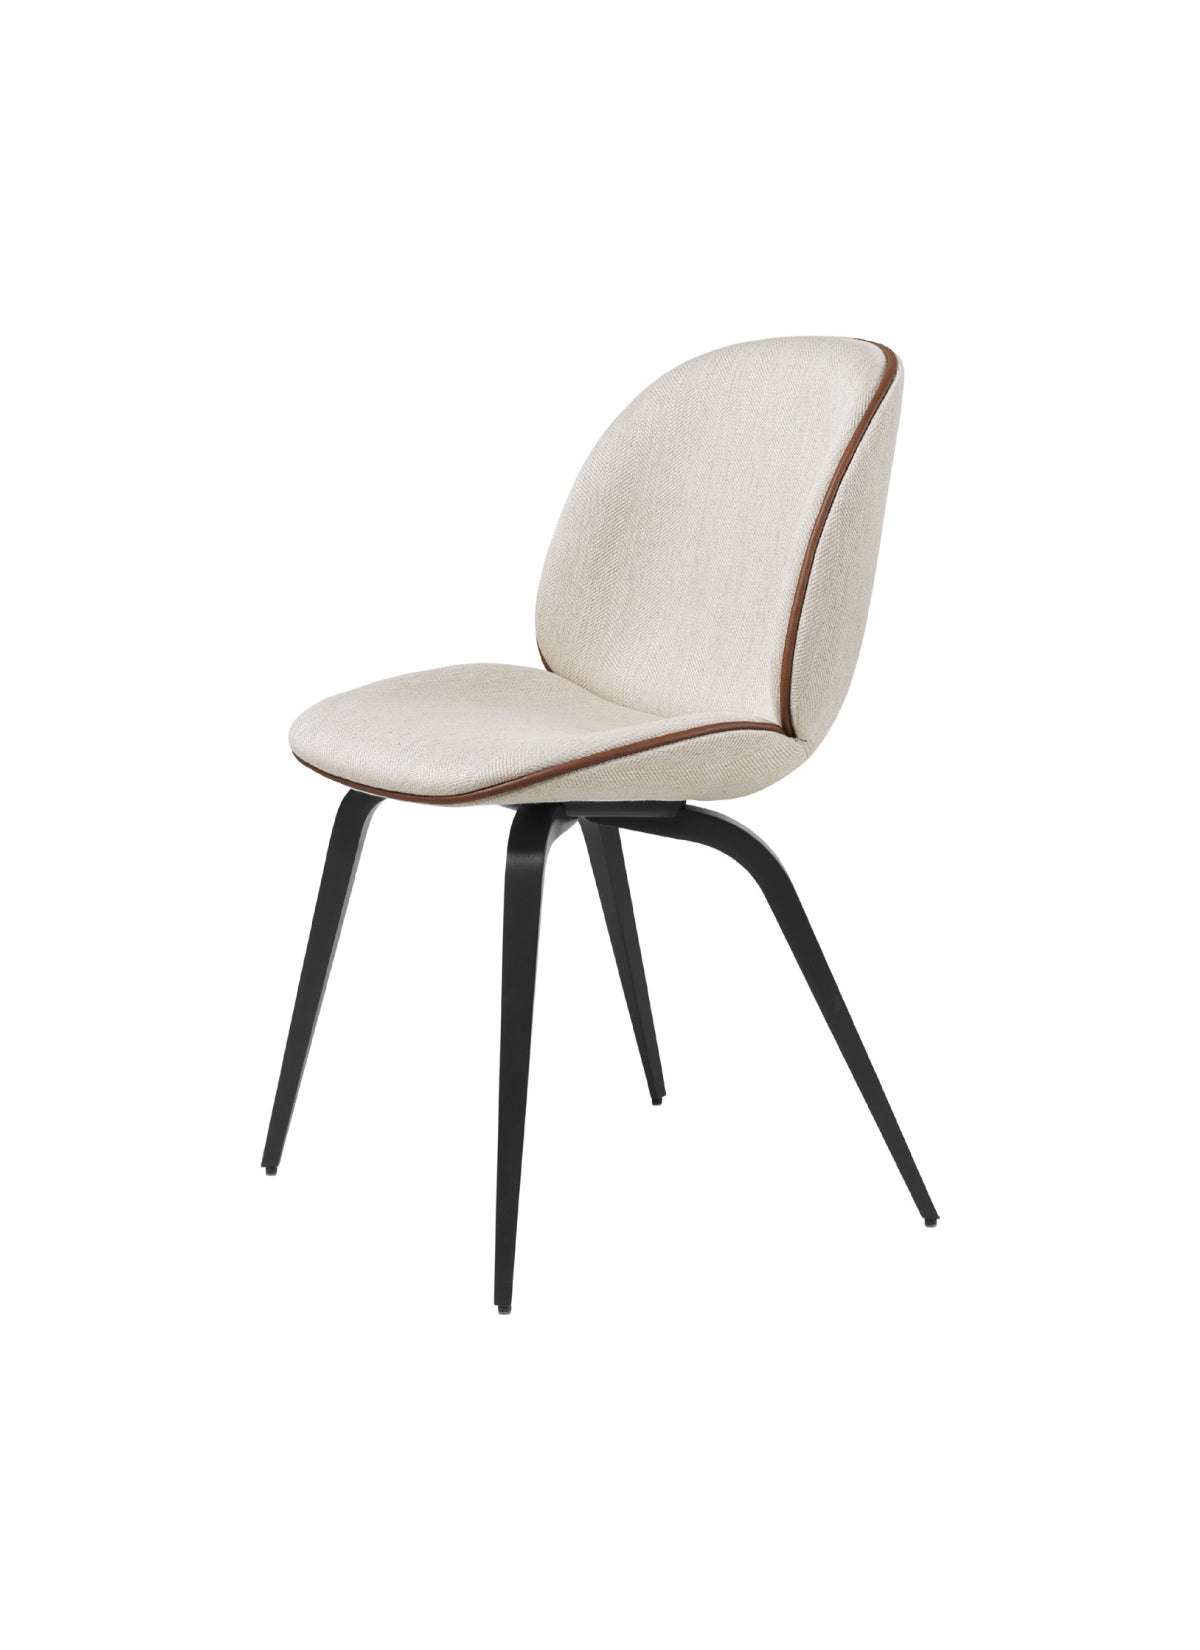 Beetle Dining Chair - Fully Upholstered - Wood Base by Gubi